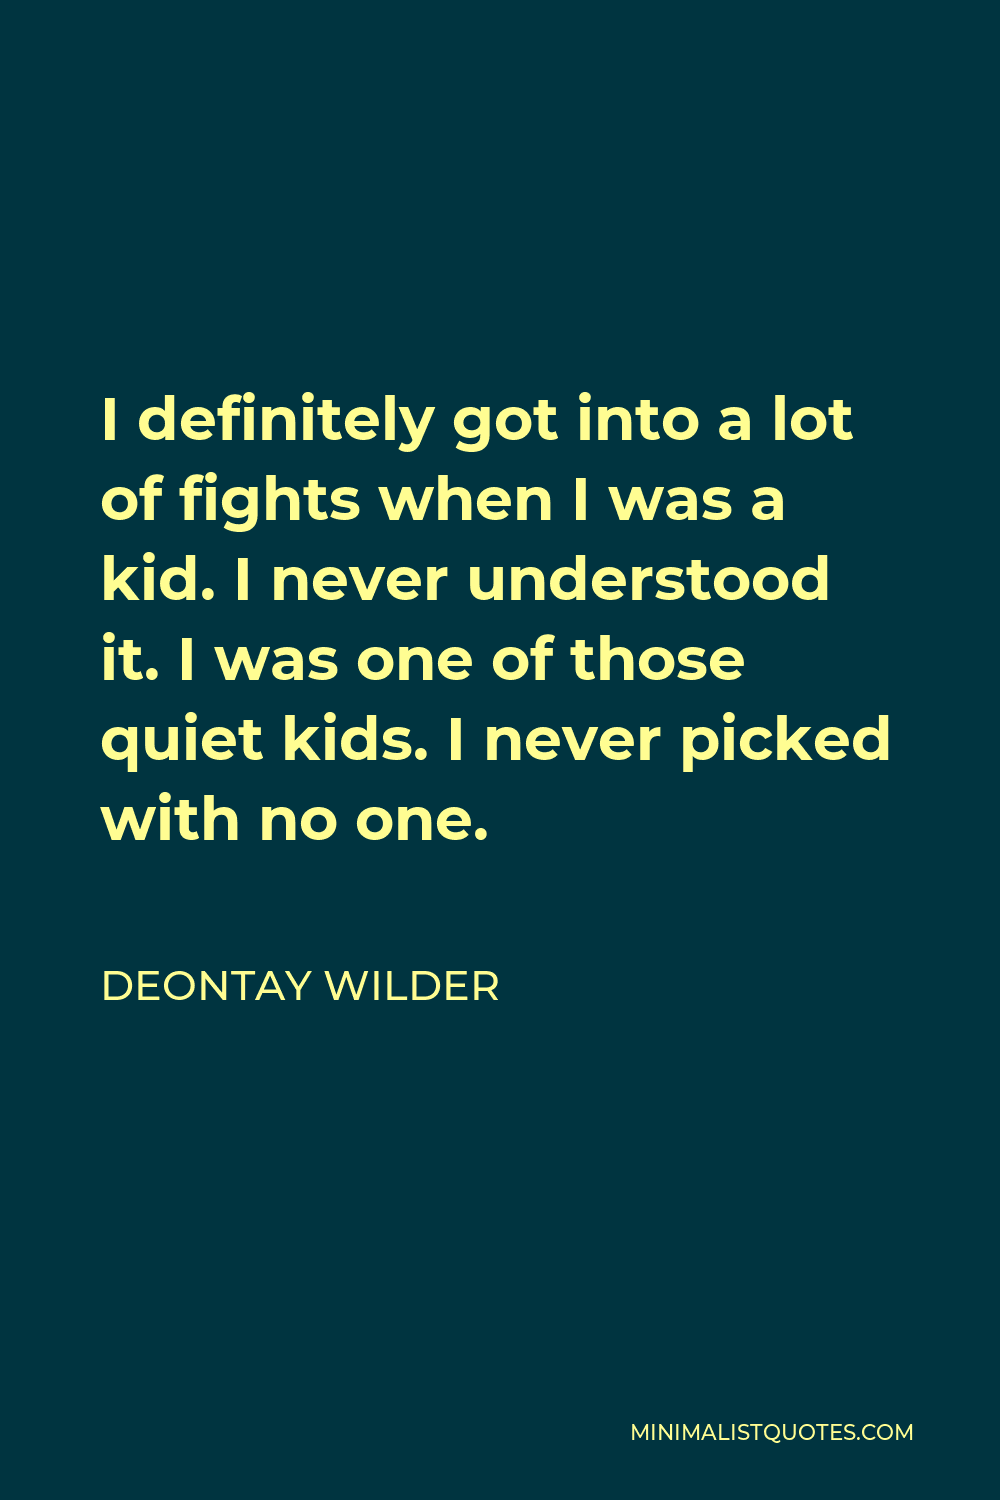 Deontay Wilder Quote - I definitely got into a lot of fights when I was a kid. I never understood it. I was one of those quiet kids. I never picked with no one.